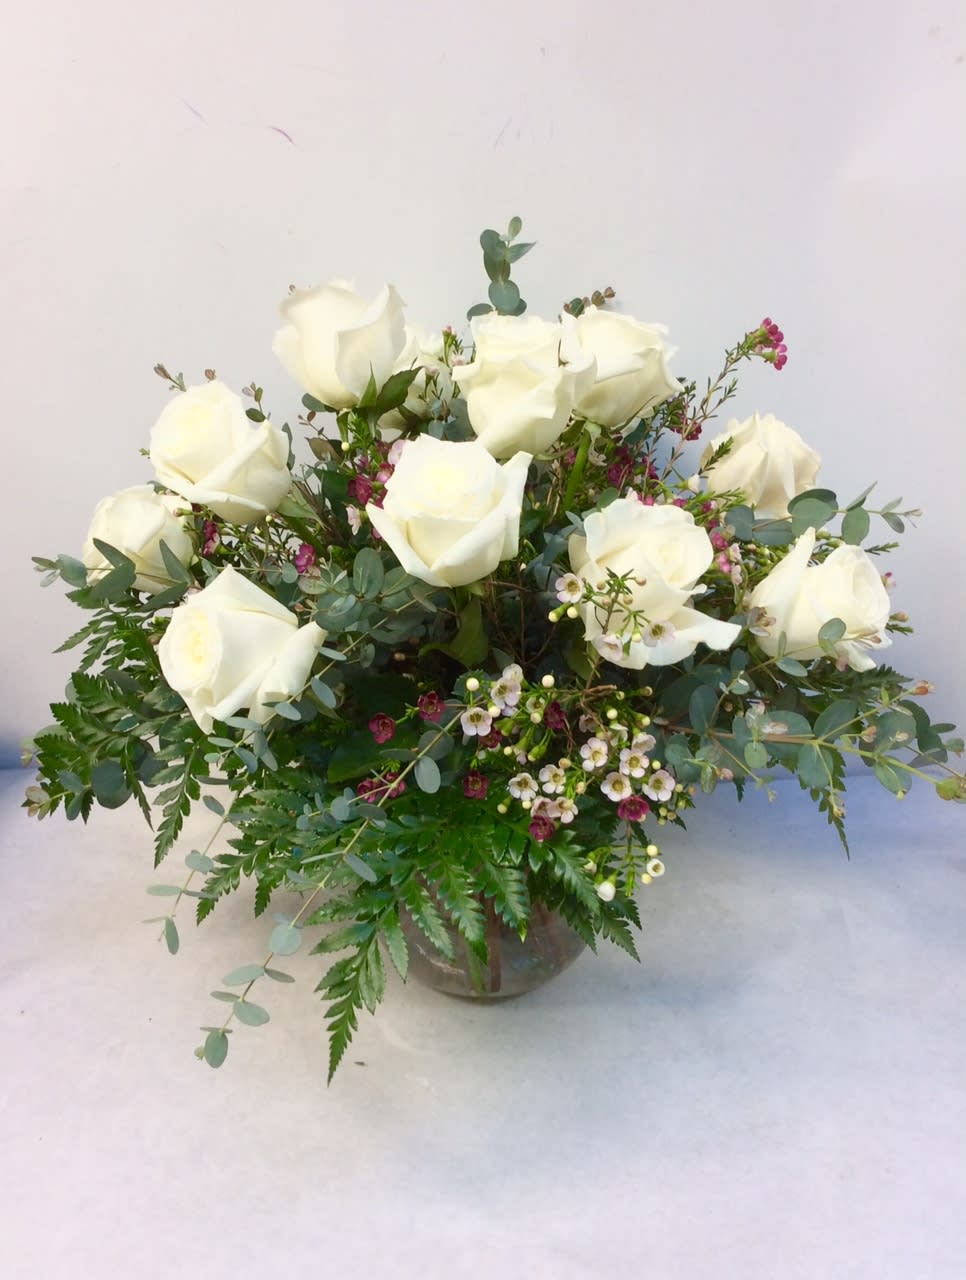 Victorian Romance by Hudson Flower Shop - A dozen cream roses, lavender waxflower and ivy are perfectly arranged in a clear glass vase. 